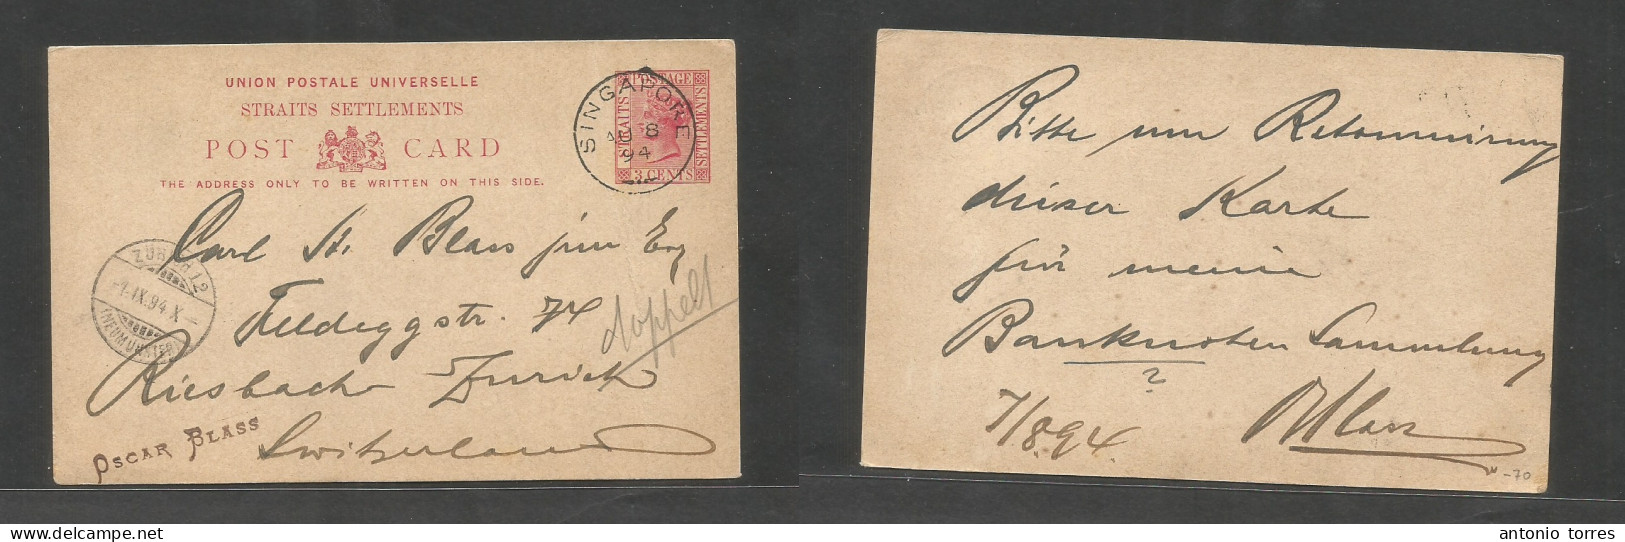 Straits Settlements Singapore. 1894 (8 Aug) Sing - Switzerland, Resbach (1 Sept) 3c Red QV Stat Card, Cds VF Used. - Singapur (1959-...)